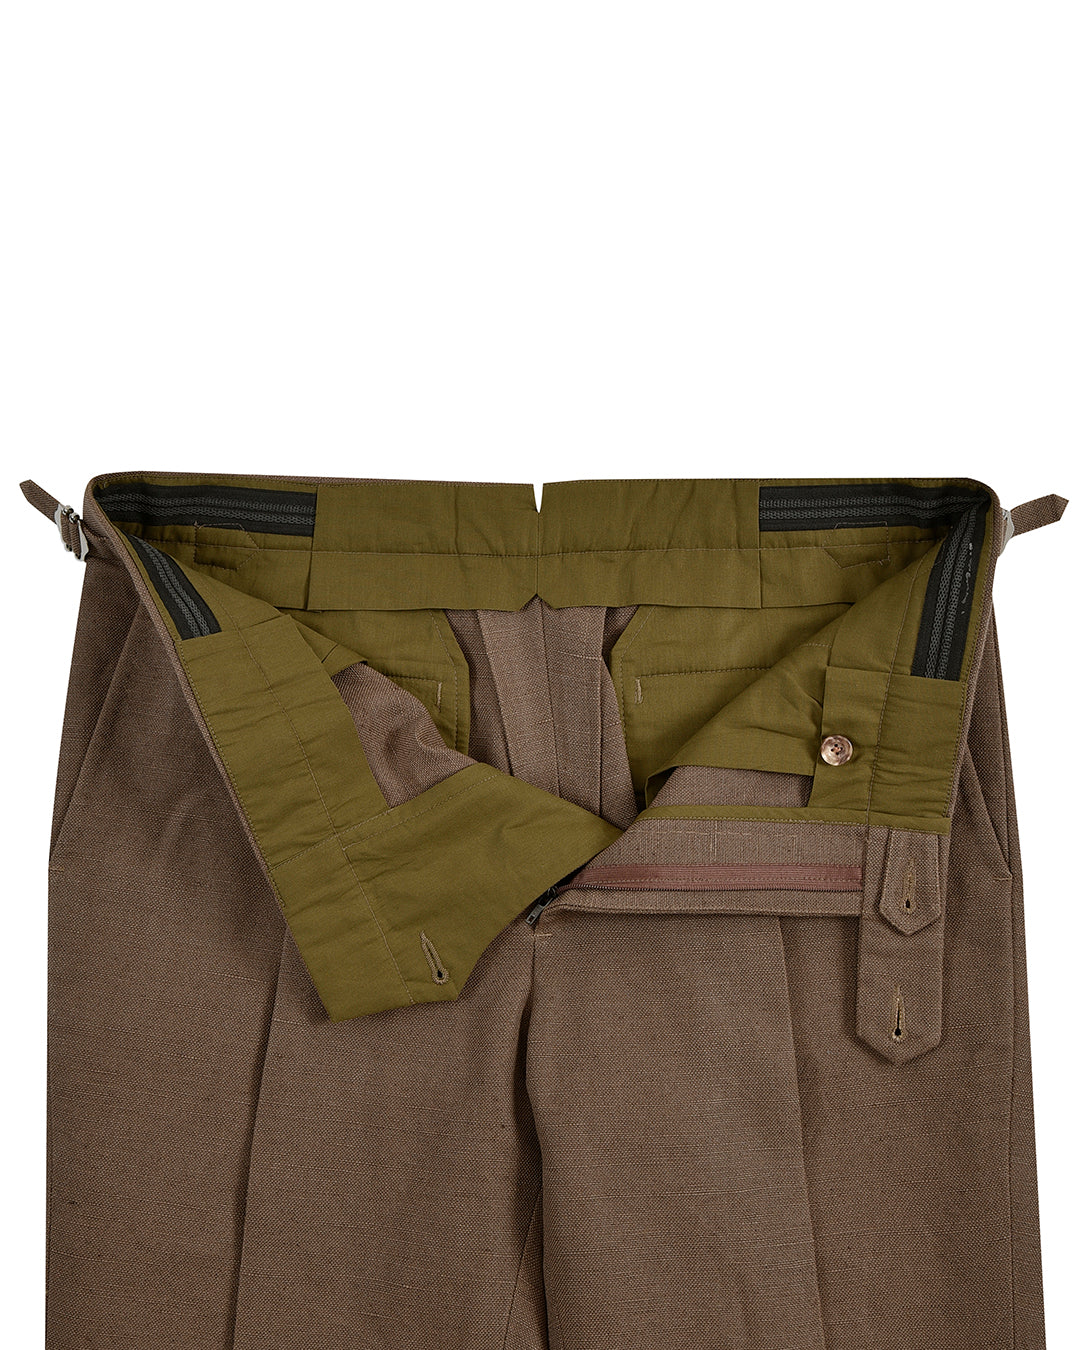 Open front view of custom linen canvas pants for men by Luxire in brown